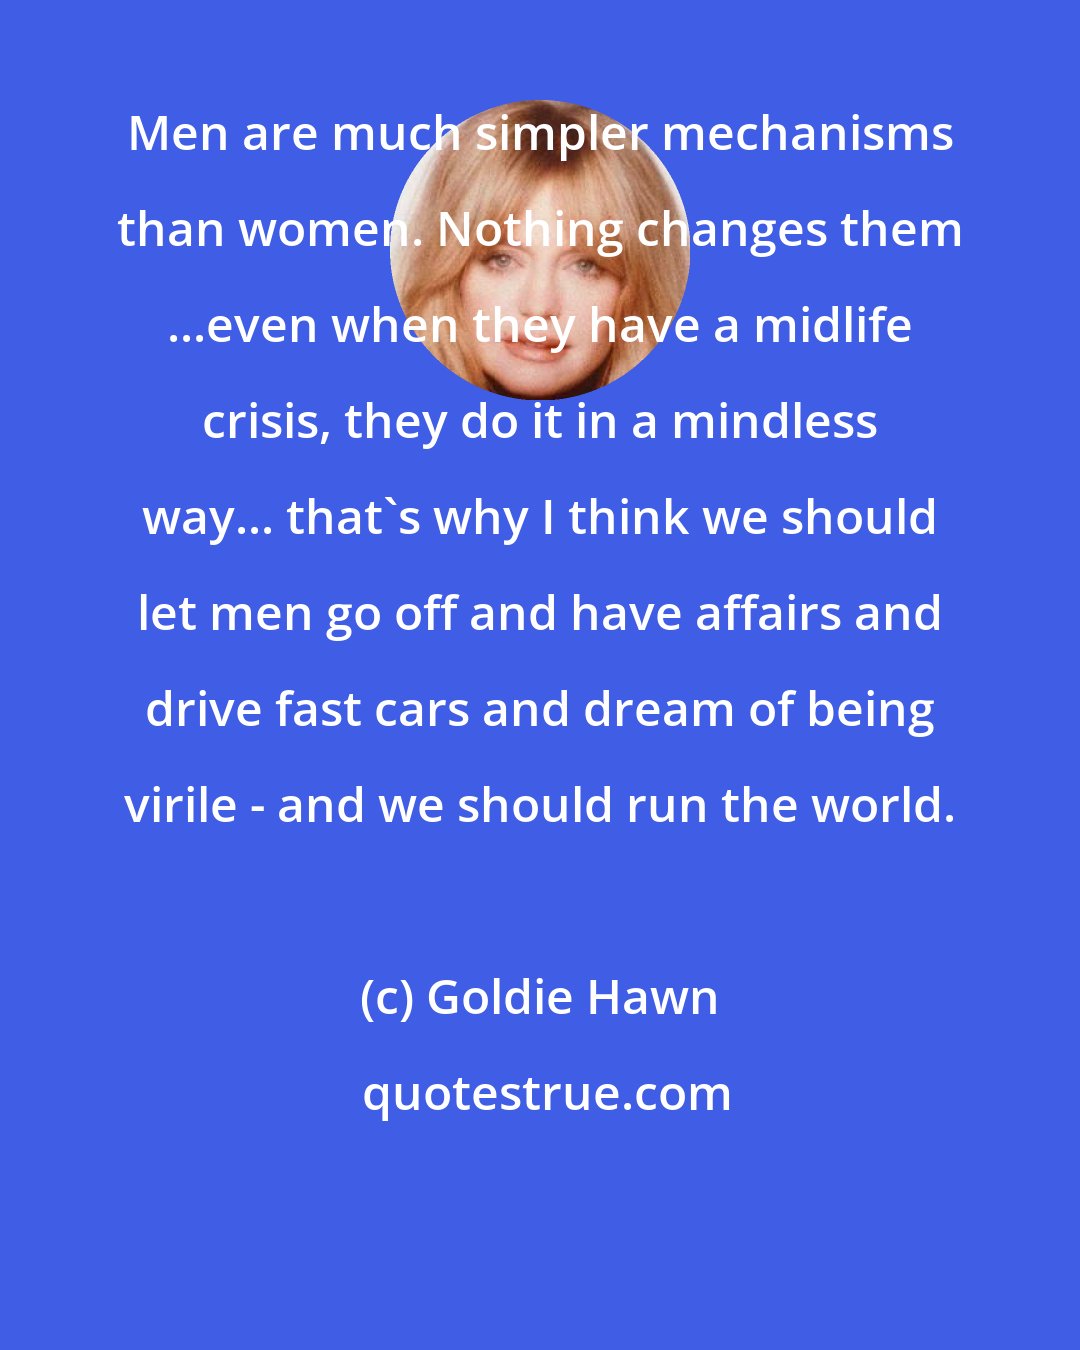 Goldie Hawn: Men are much simpler mechanisms than women. Nothing changes them ...even when they have a midlife crisis, they do it in a mindless way... that's why I think we should let men go off and have affairs and drive fast cars and dream of being virile - and we should run the world.